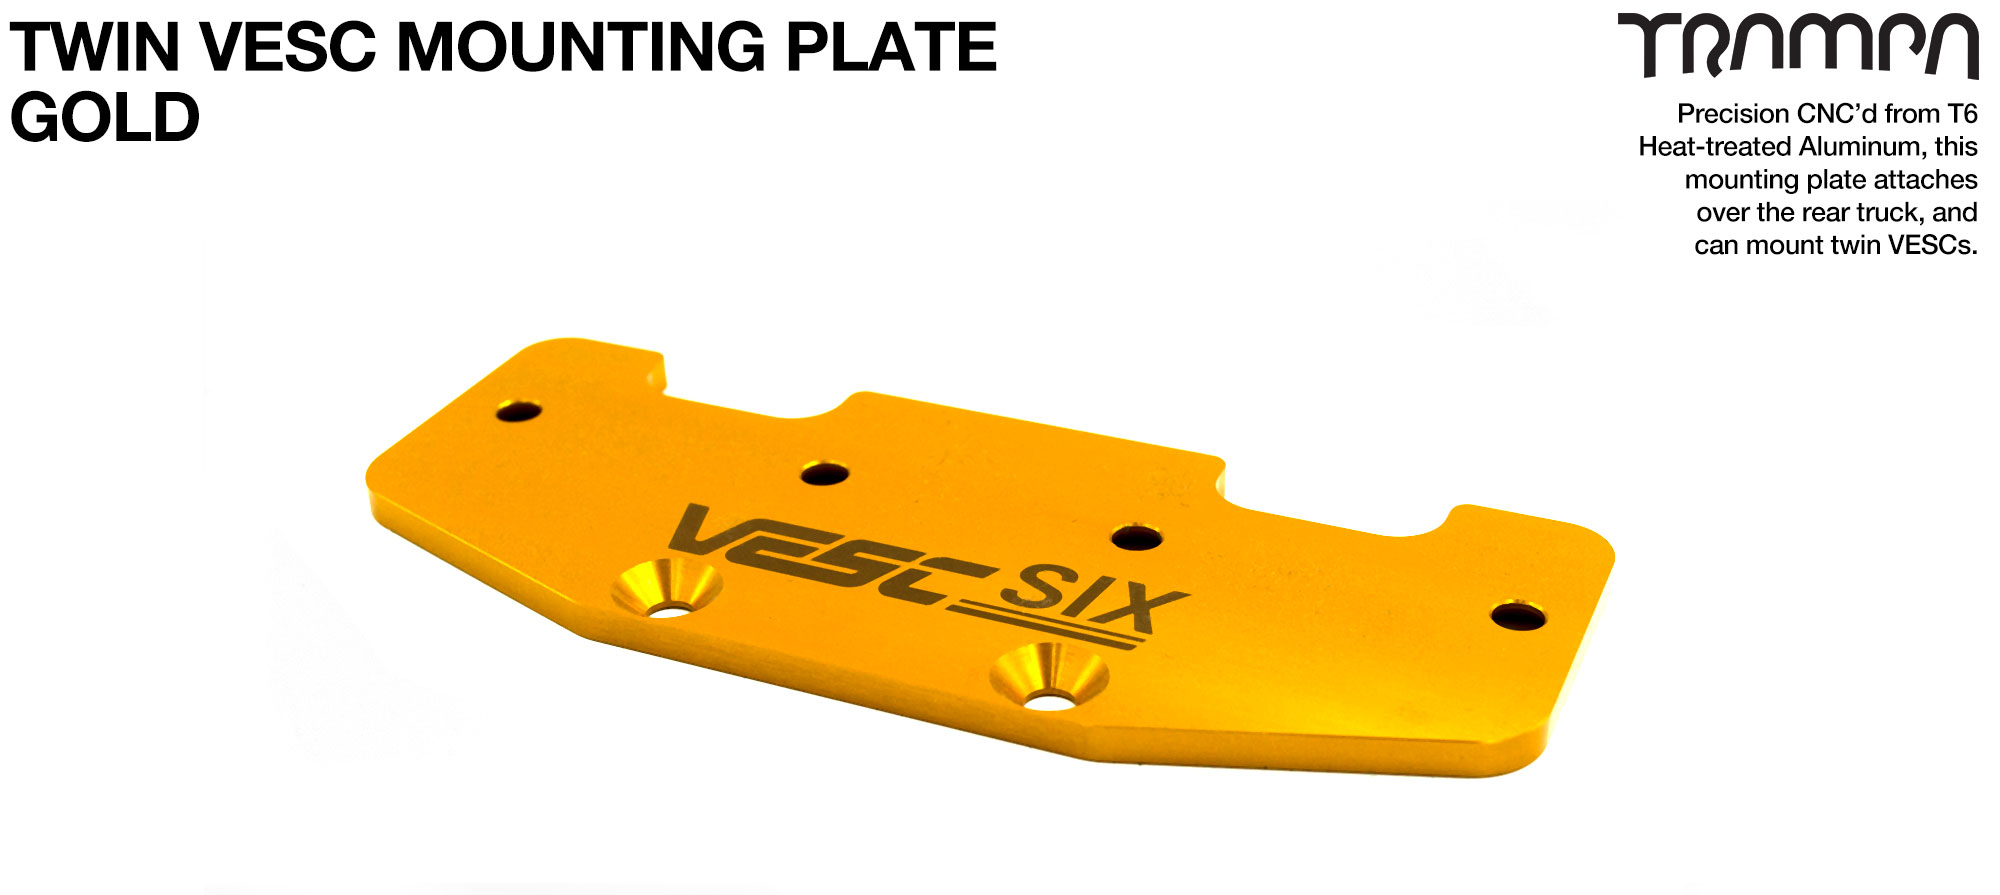 ALUMINIUM mounting Plate for TWIN VESC 6 - Anodised GOLD 